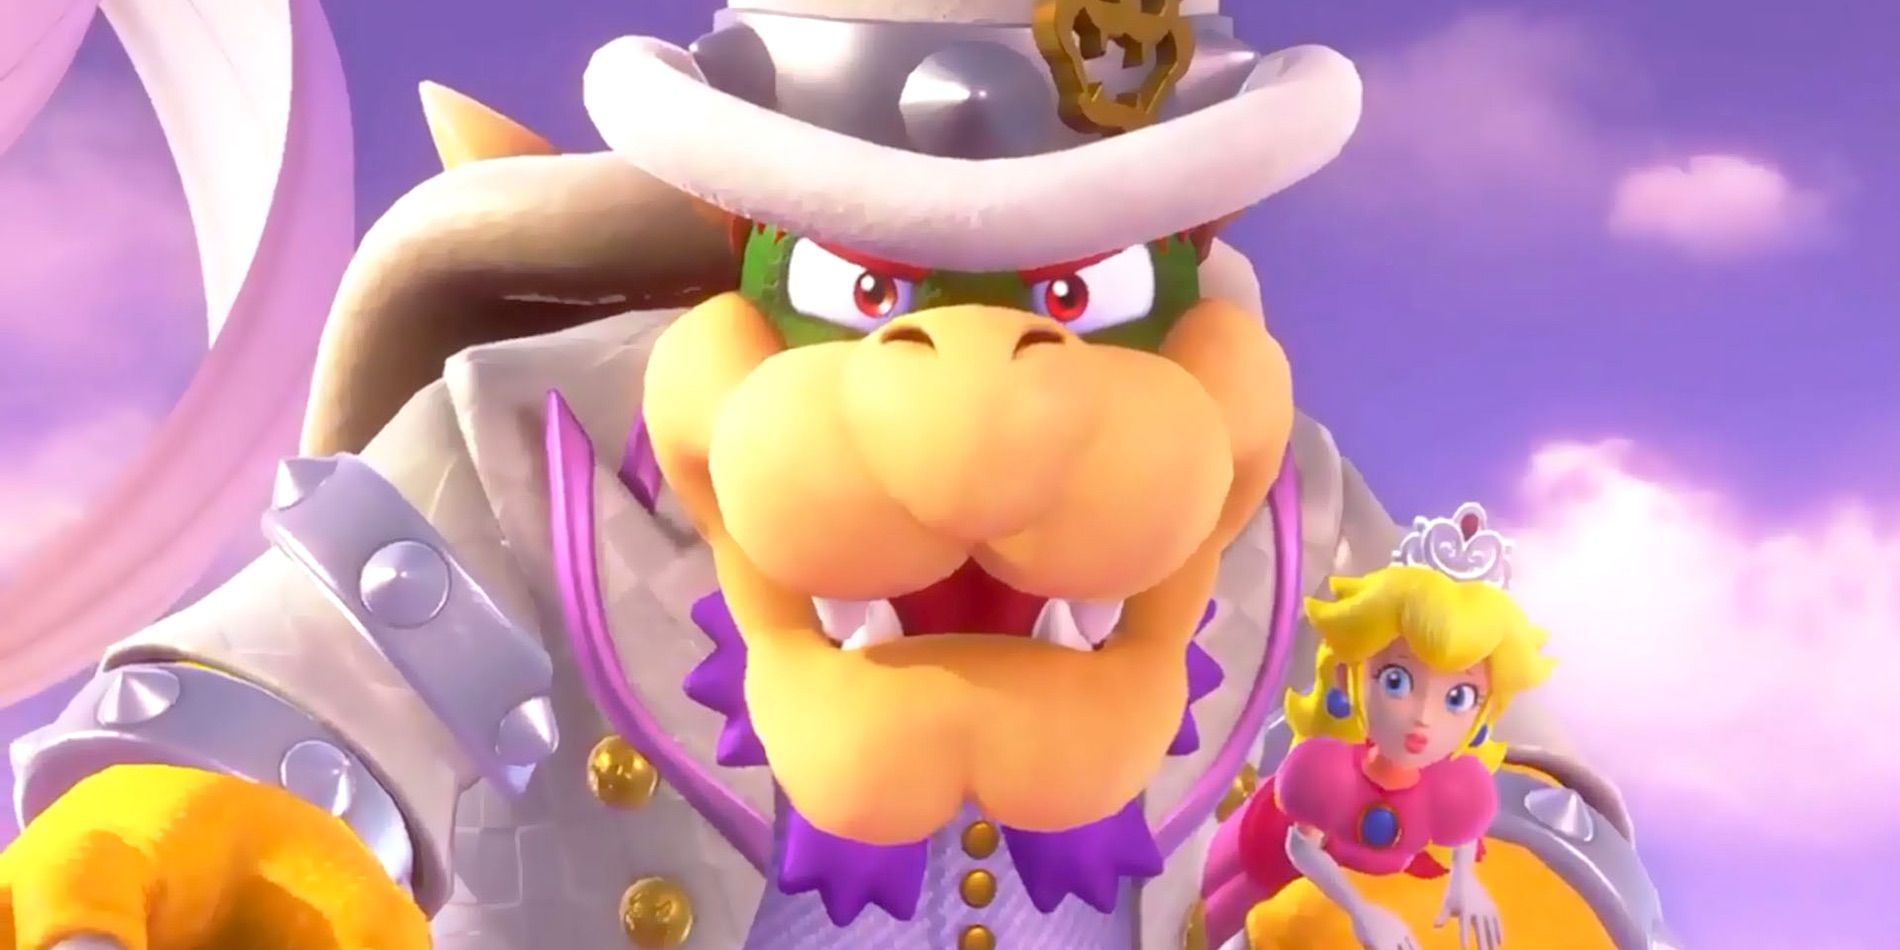 Bowser wearing a wedding tuxedo and holding Peach in Super Mario Odyssey